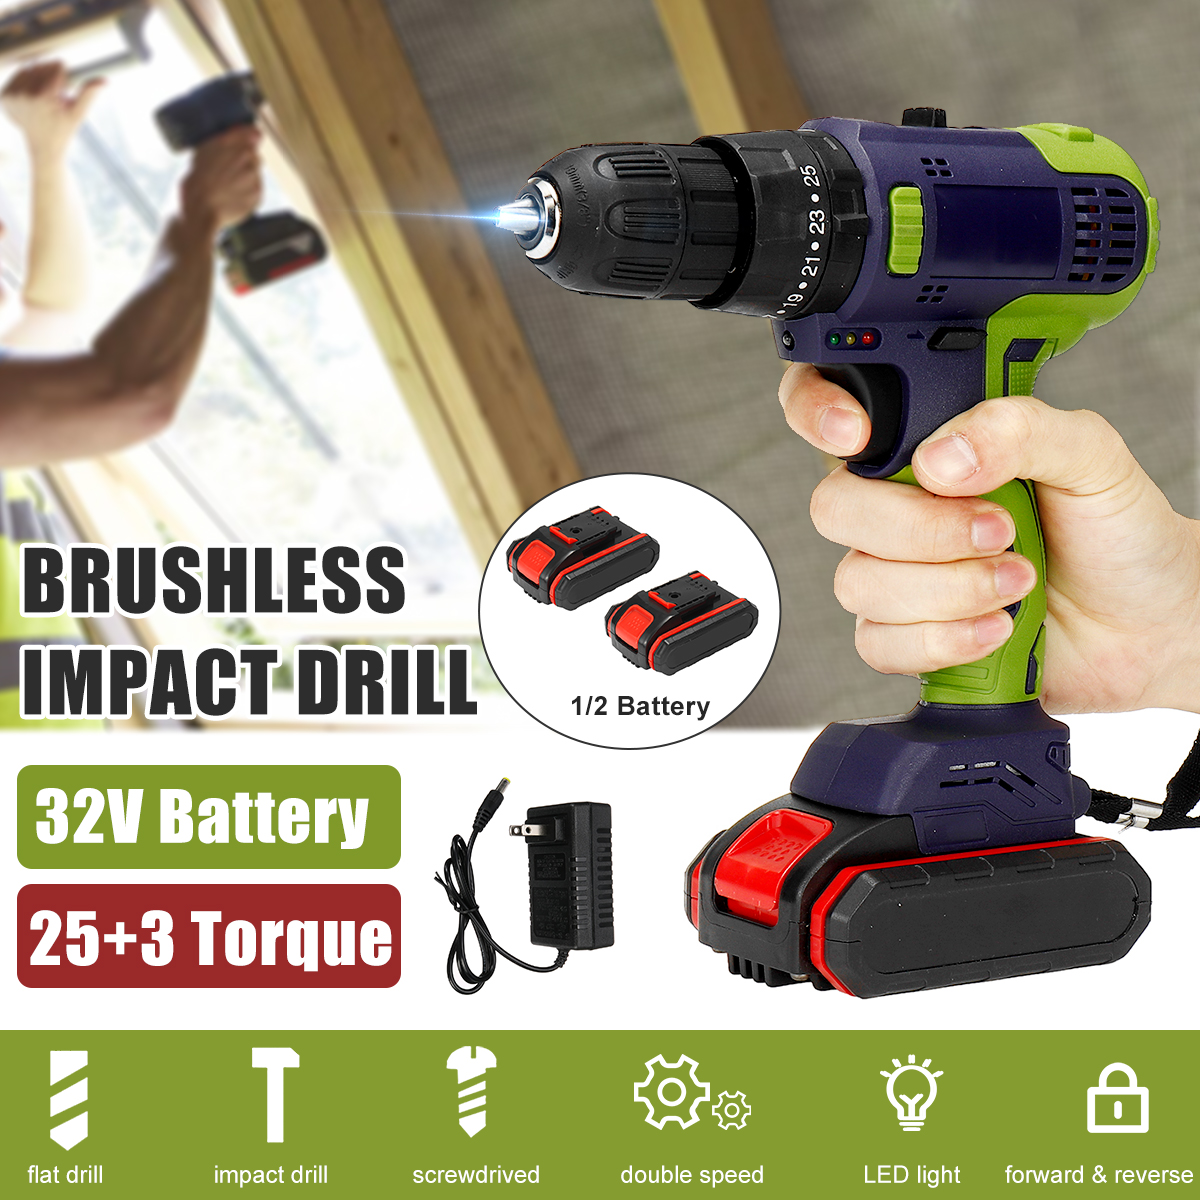 32V-Brushless-Impact-Drill-Lithium-Electric-Torque-Drill-Driver-With-12-Battery-LED-Light-1837414-1